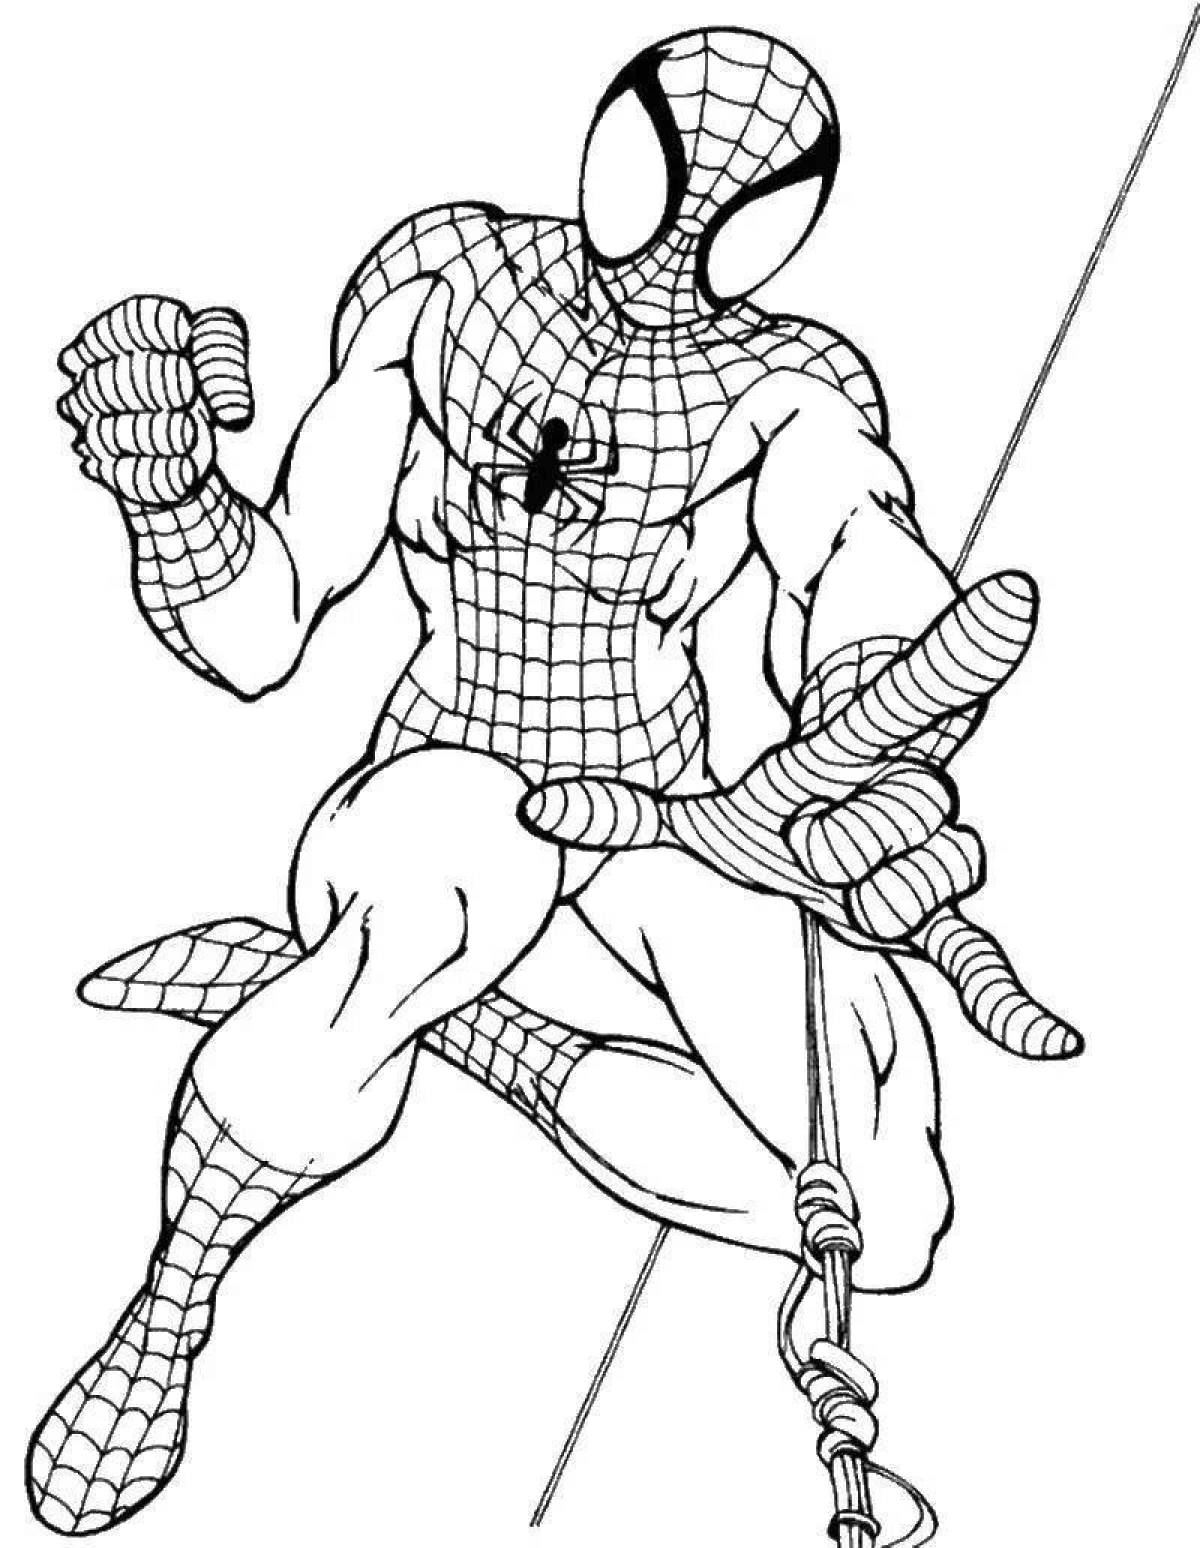 Color the Spider-Man page boldly